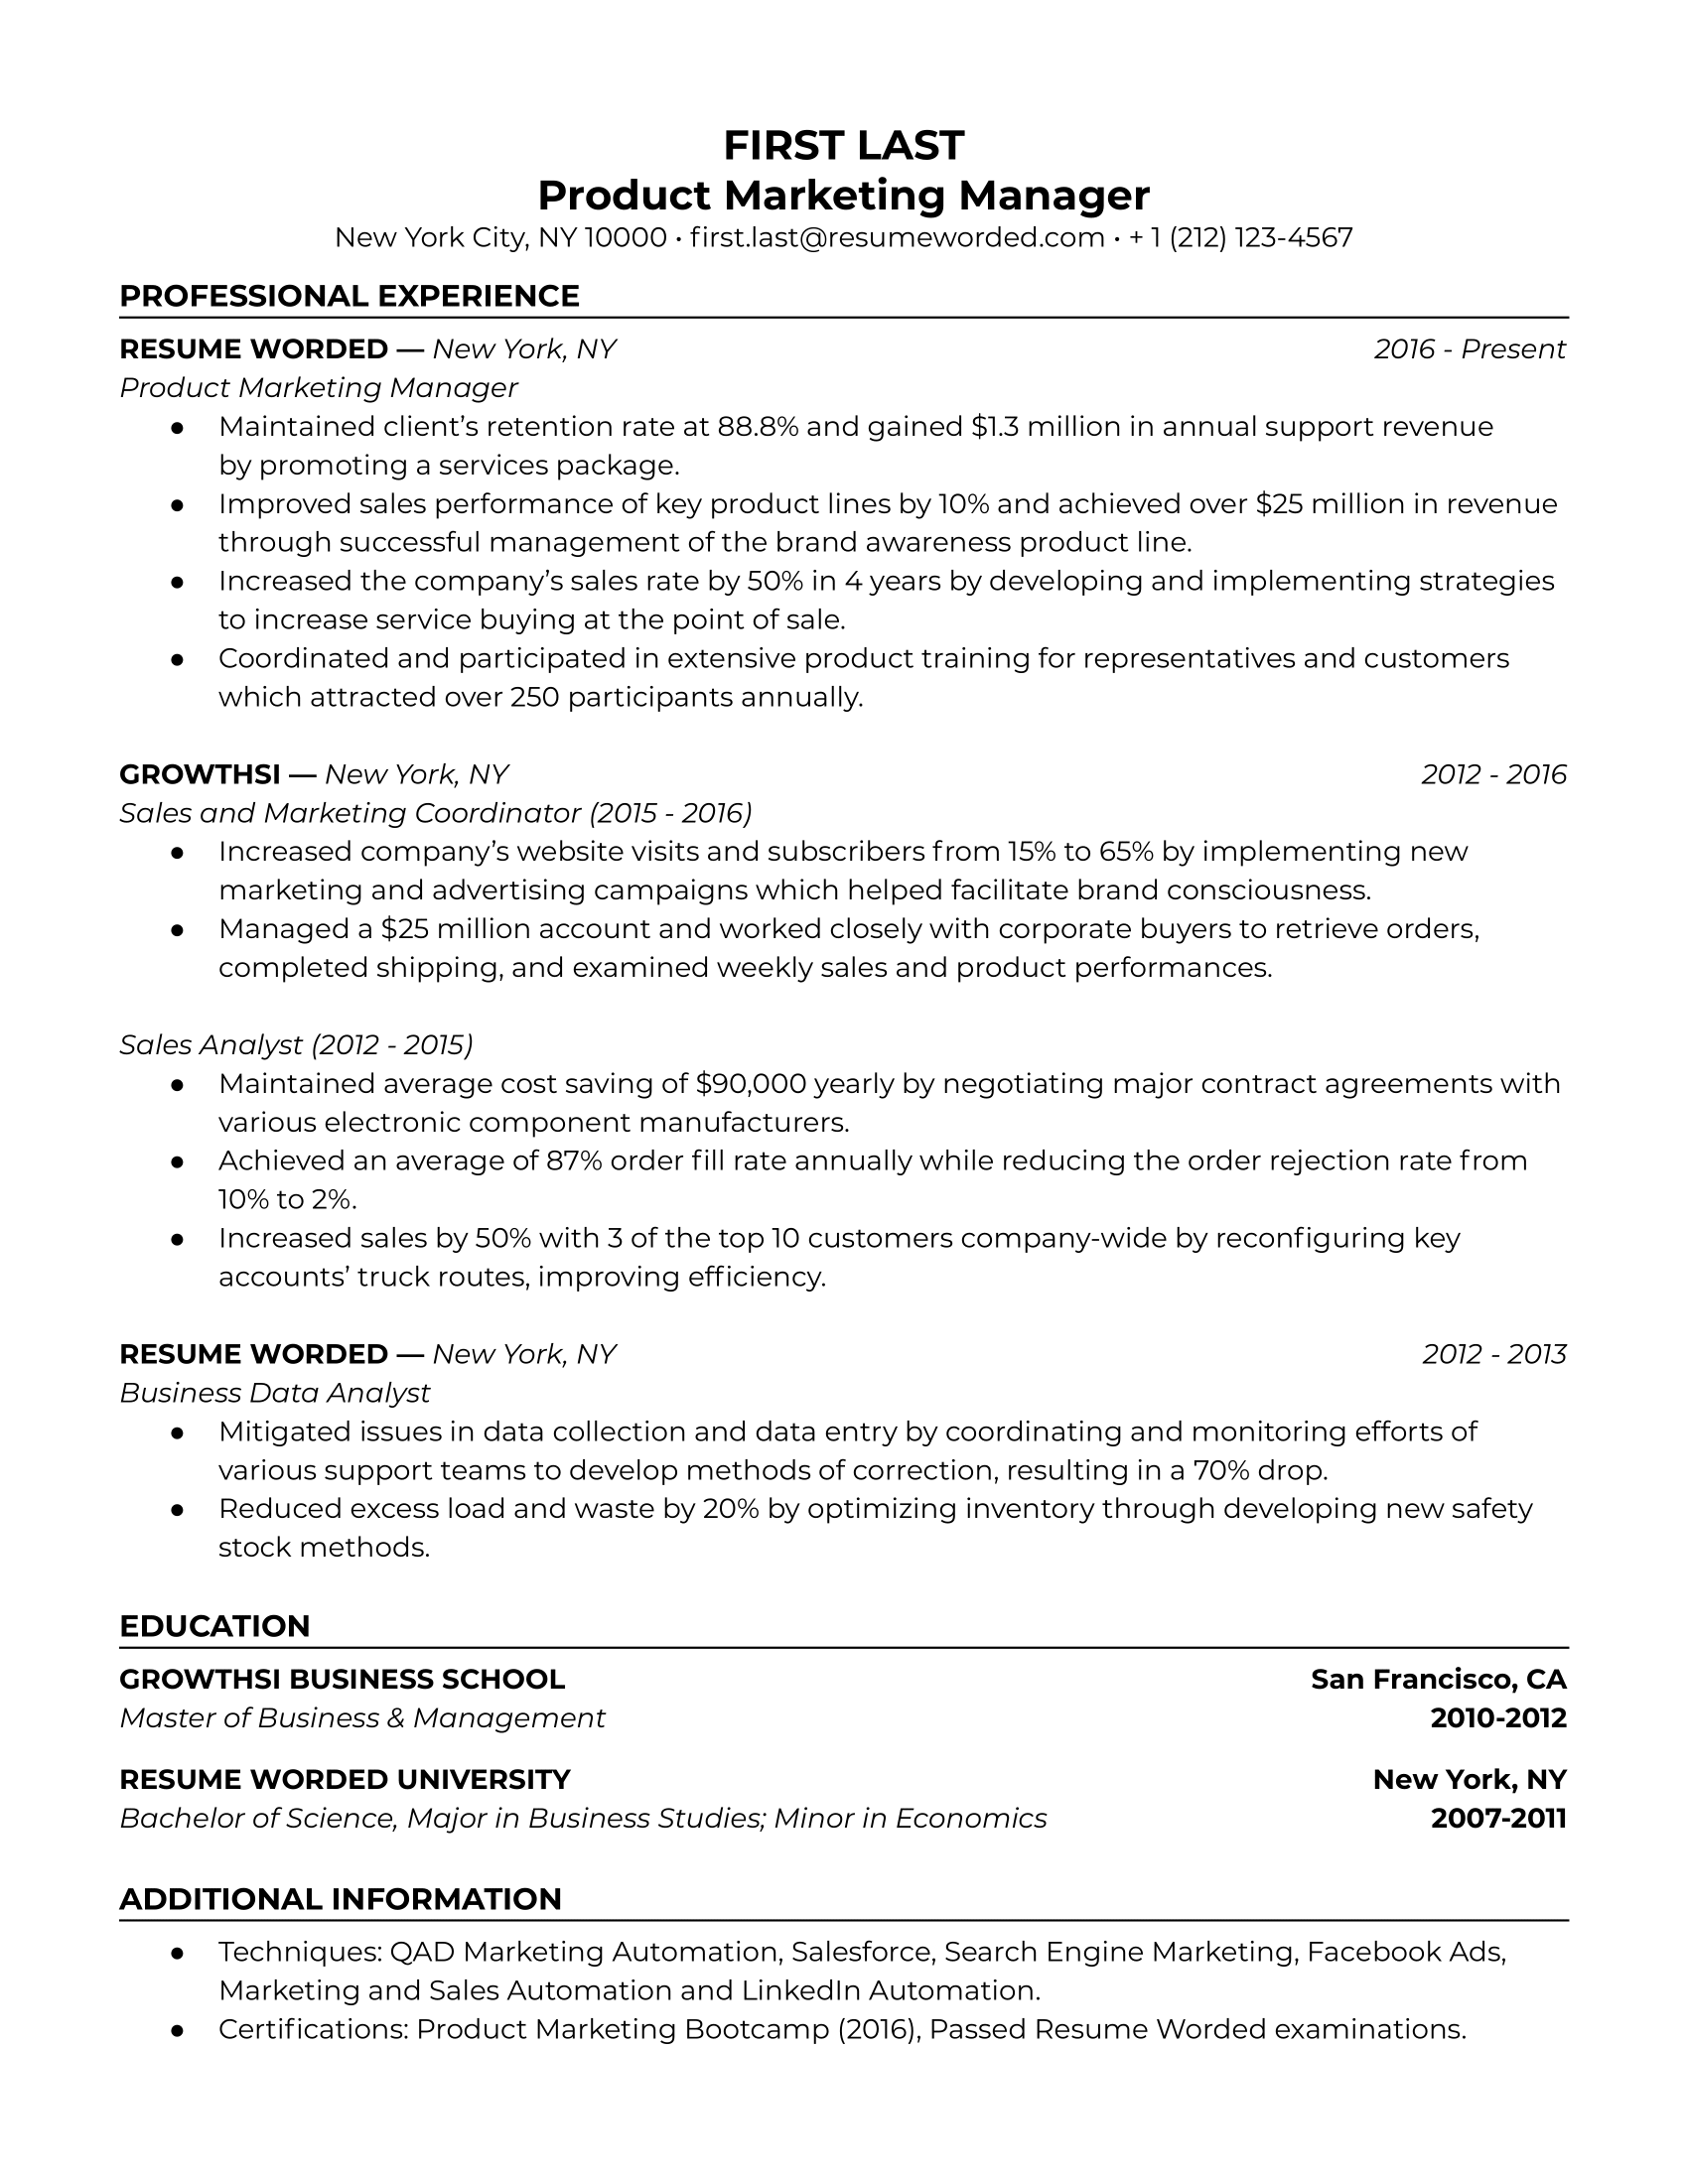 Product marketing manager resume with promotions, work experience, and past achievements